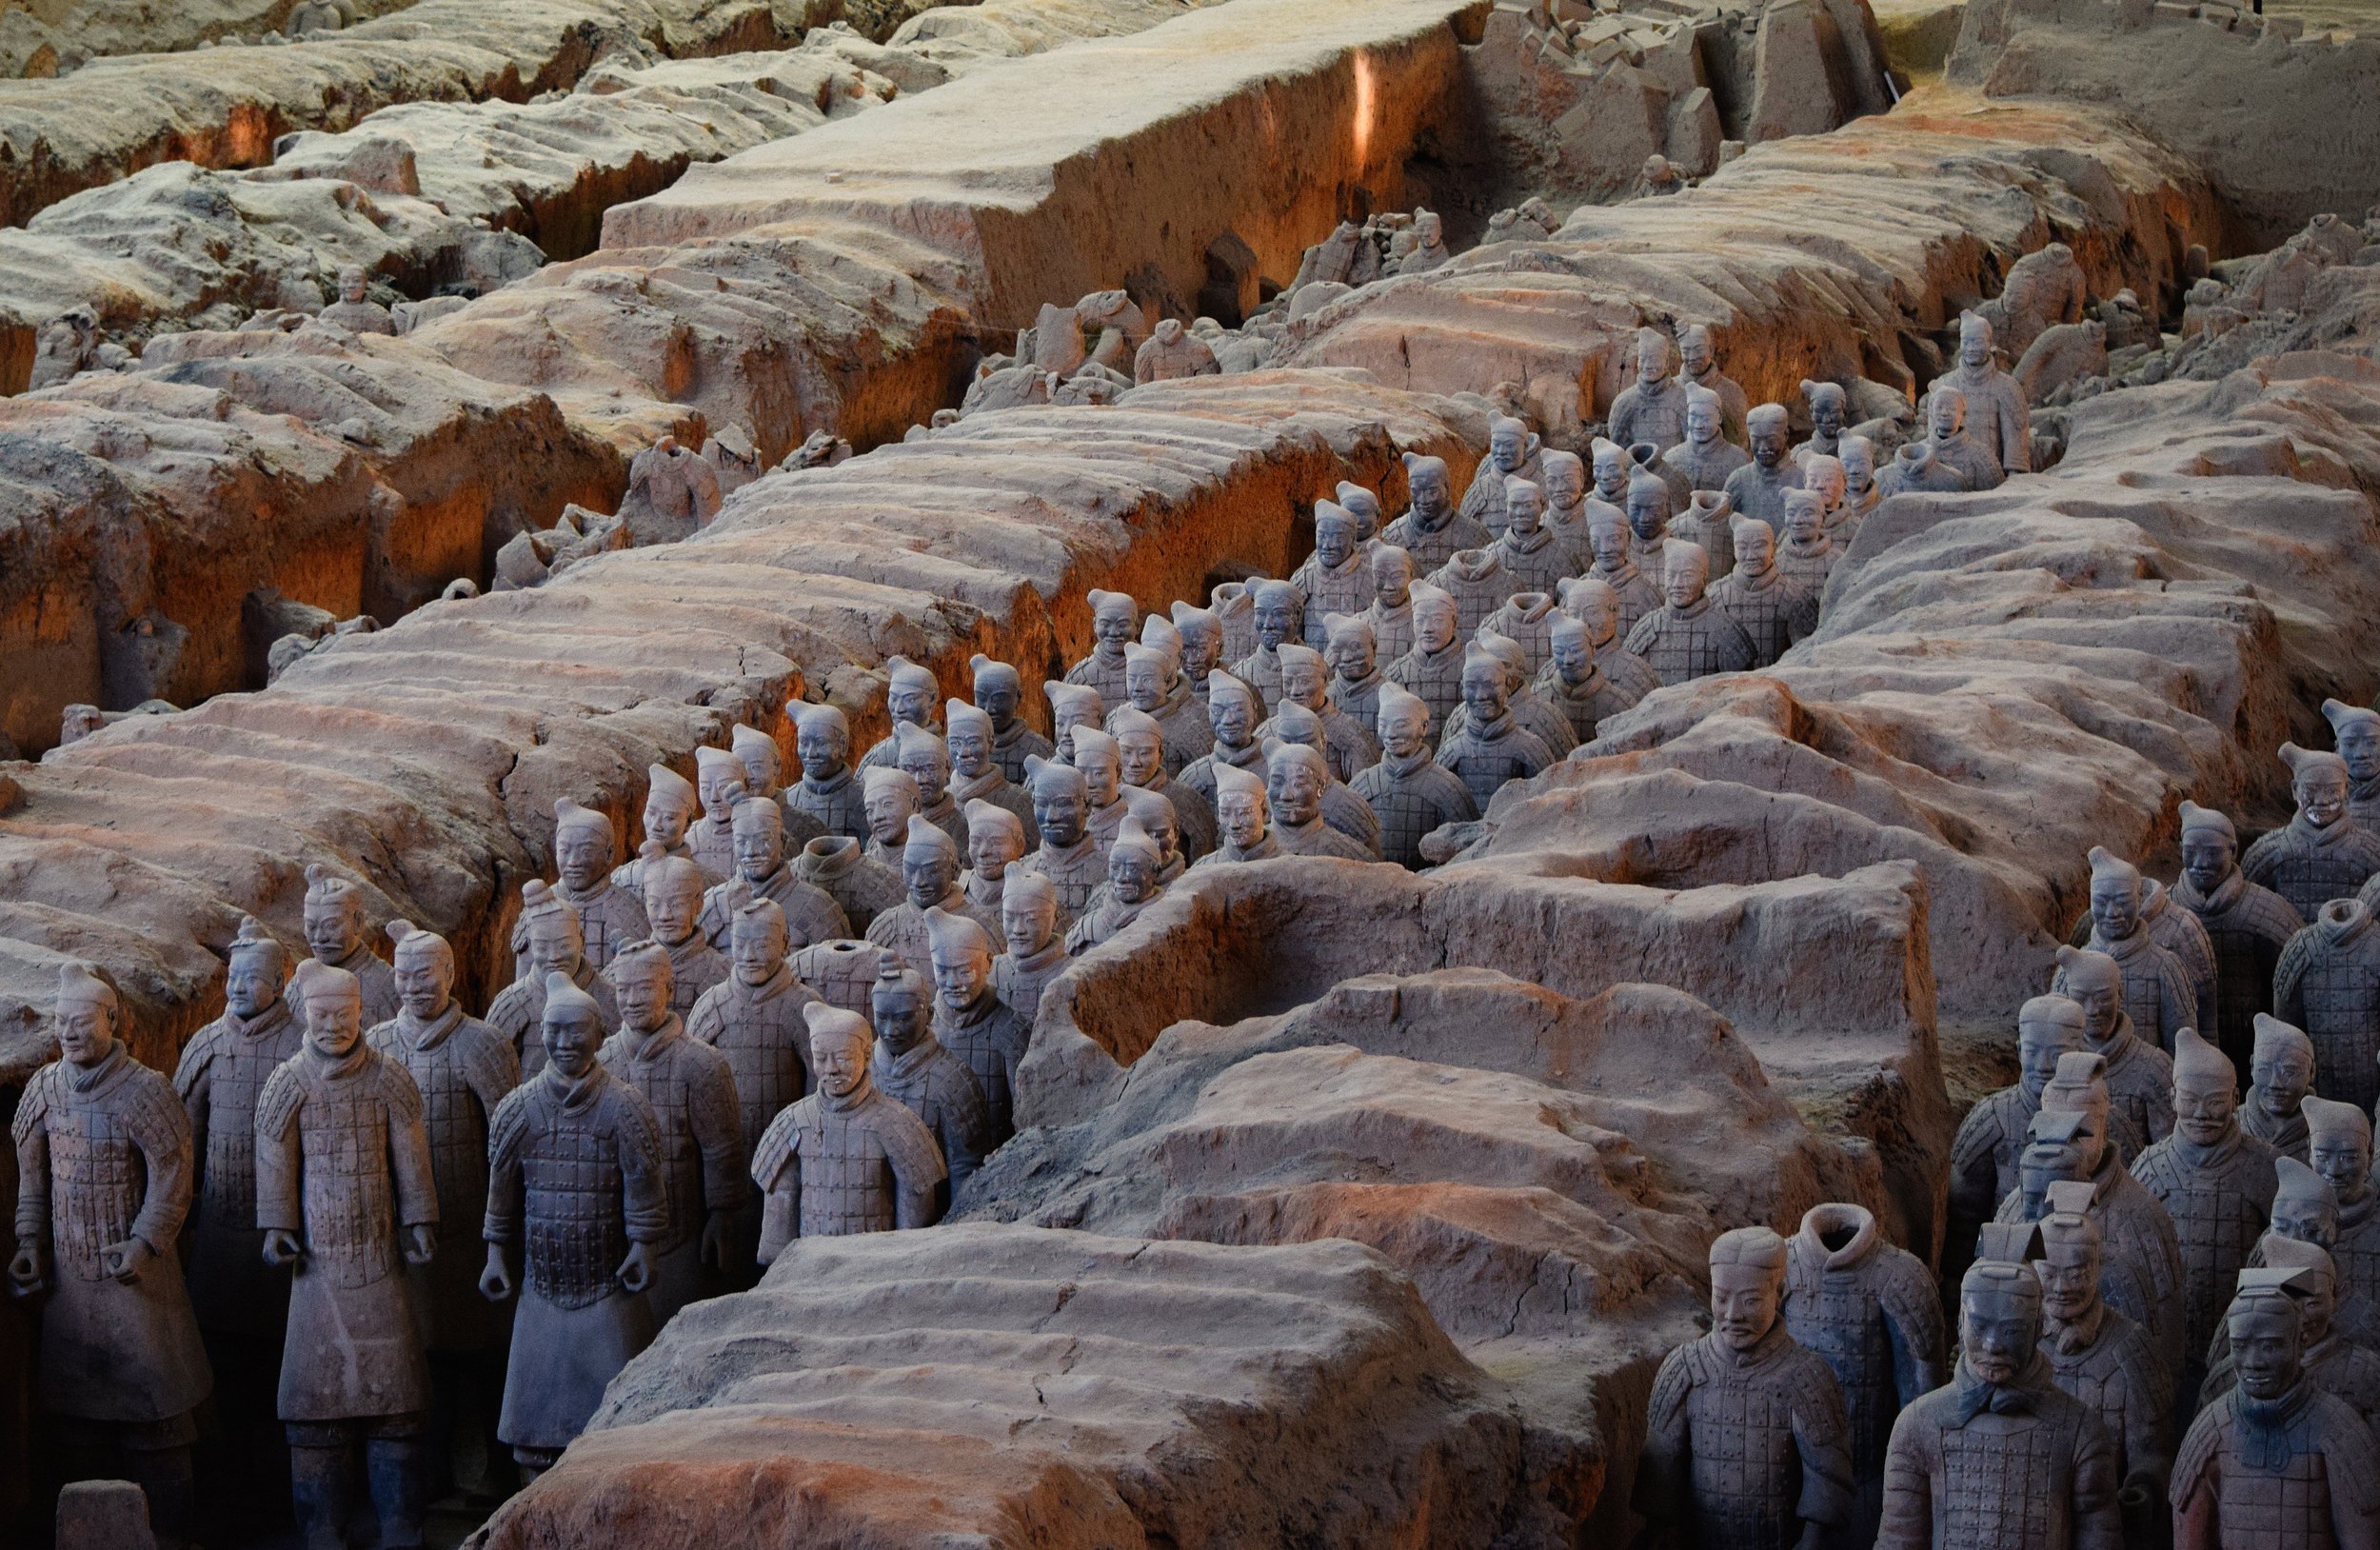 While digging wells on the outskirts of Xi’an in 1974, a group of farmers stumbled across one of the most significant discoveries in the history of archaeology; the terracotta army, which had remained hidden underground for over 2,000 years. &n…